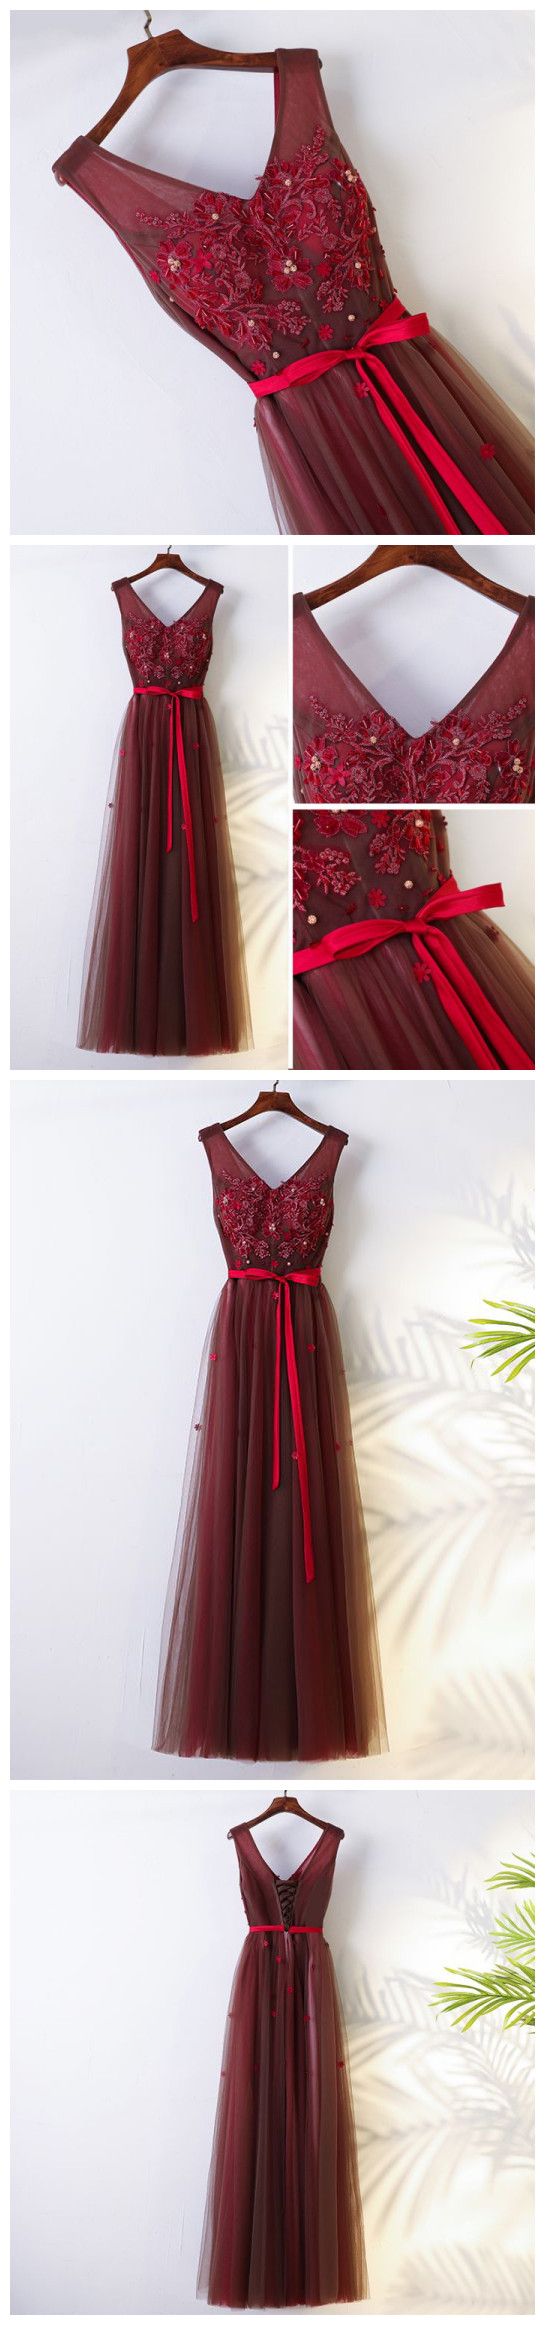 Elegant Tulle Lace Burgundy Long Prom Dress,wine Red Lace Evening Dress,pd14331